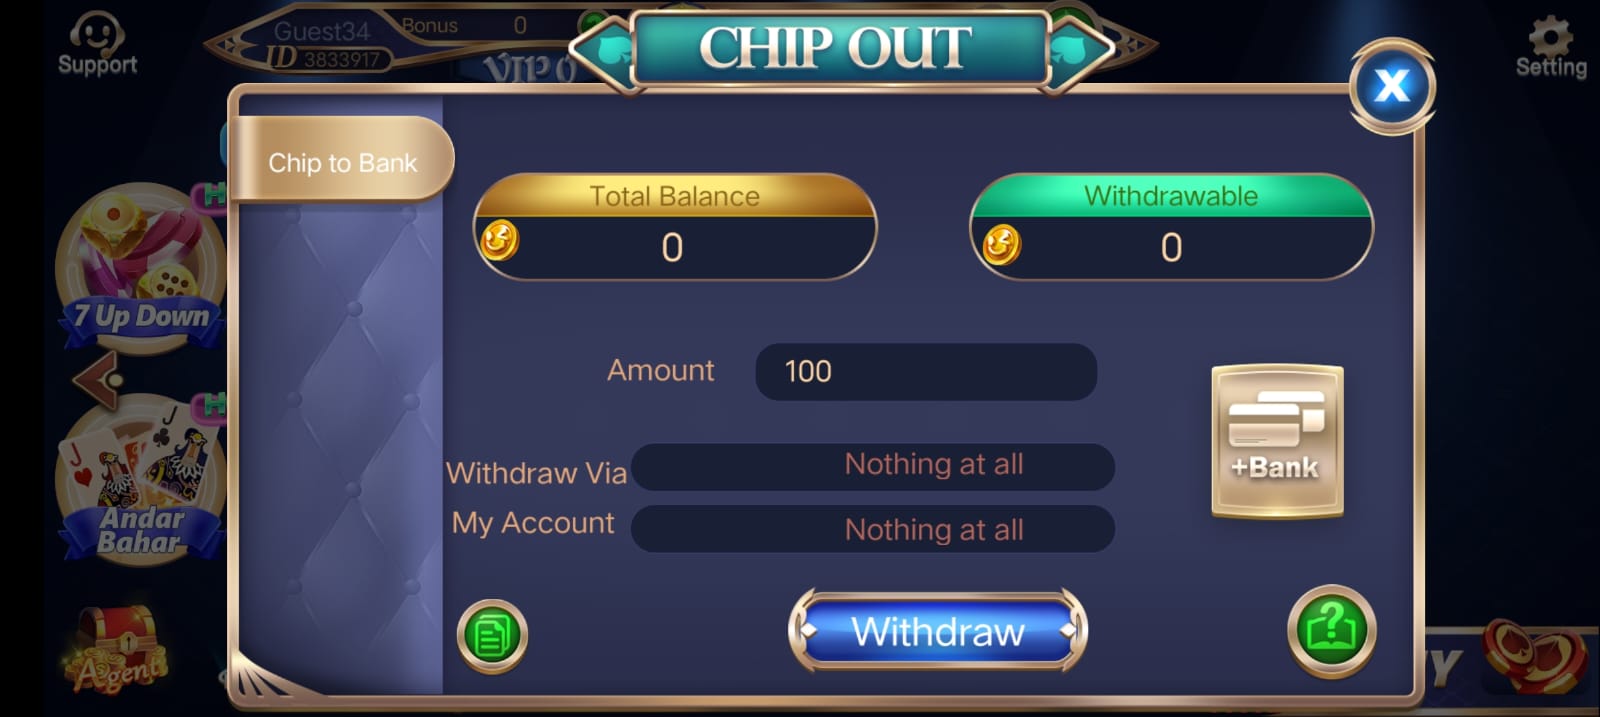 Withdrawal Money In Teen Patti Life Application